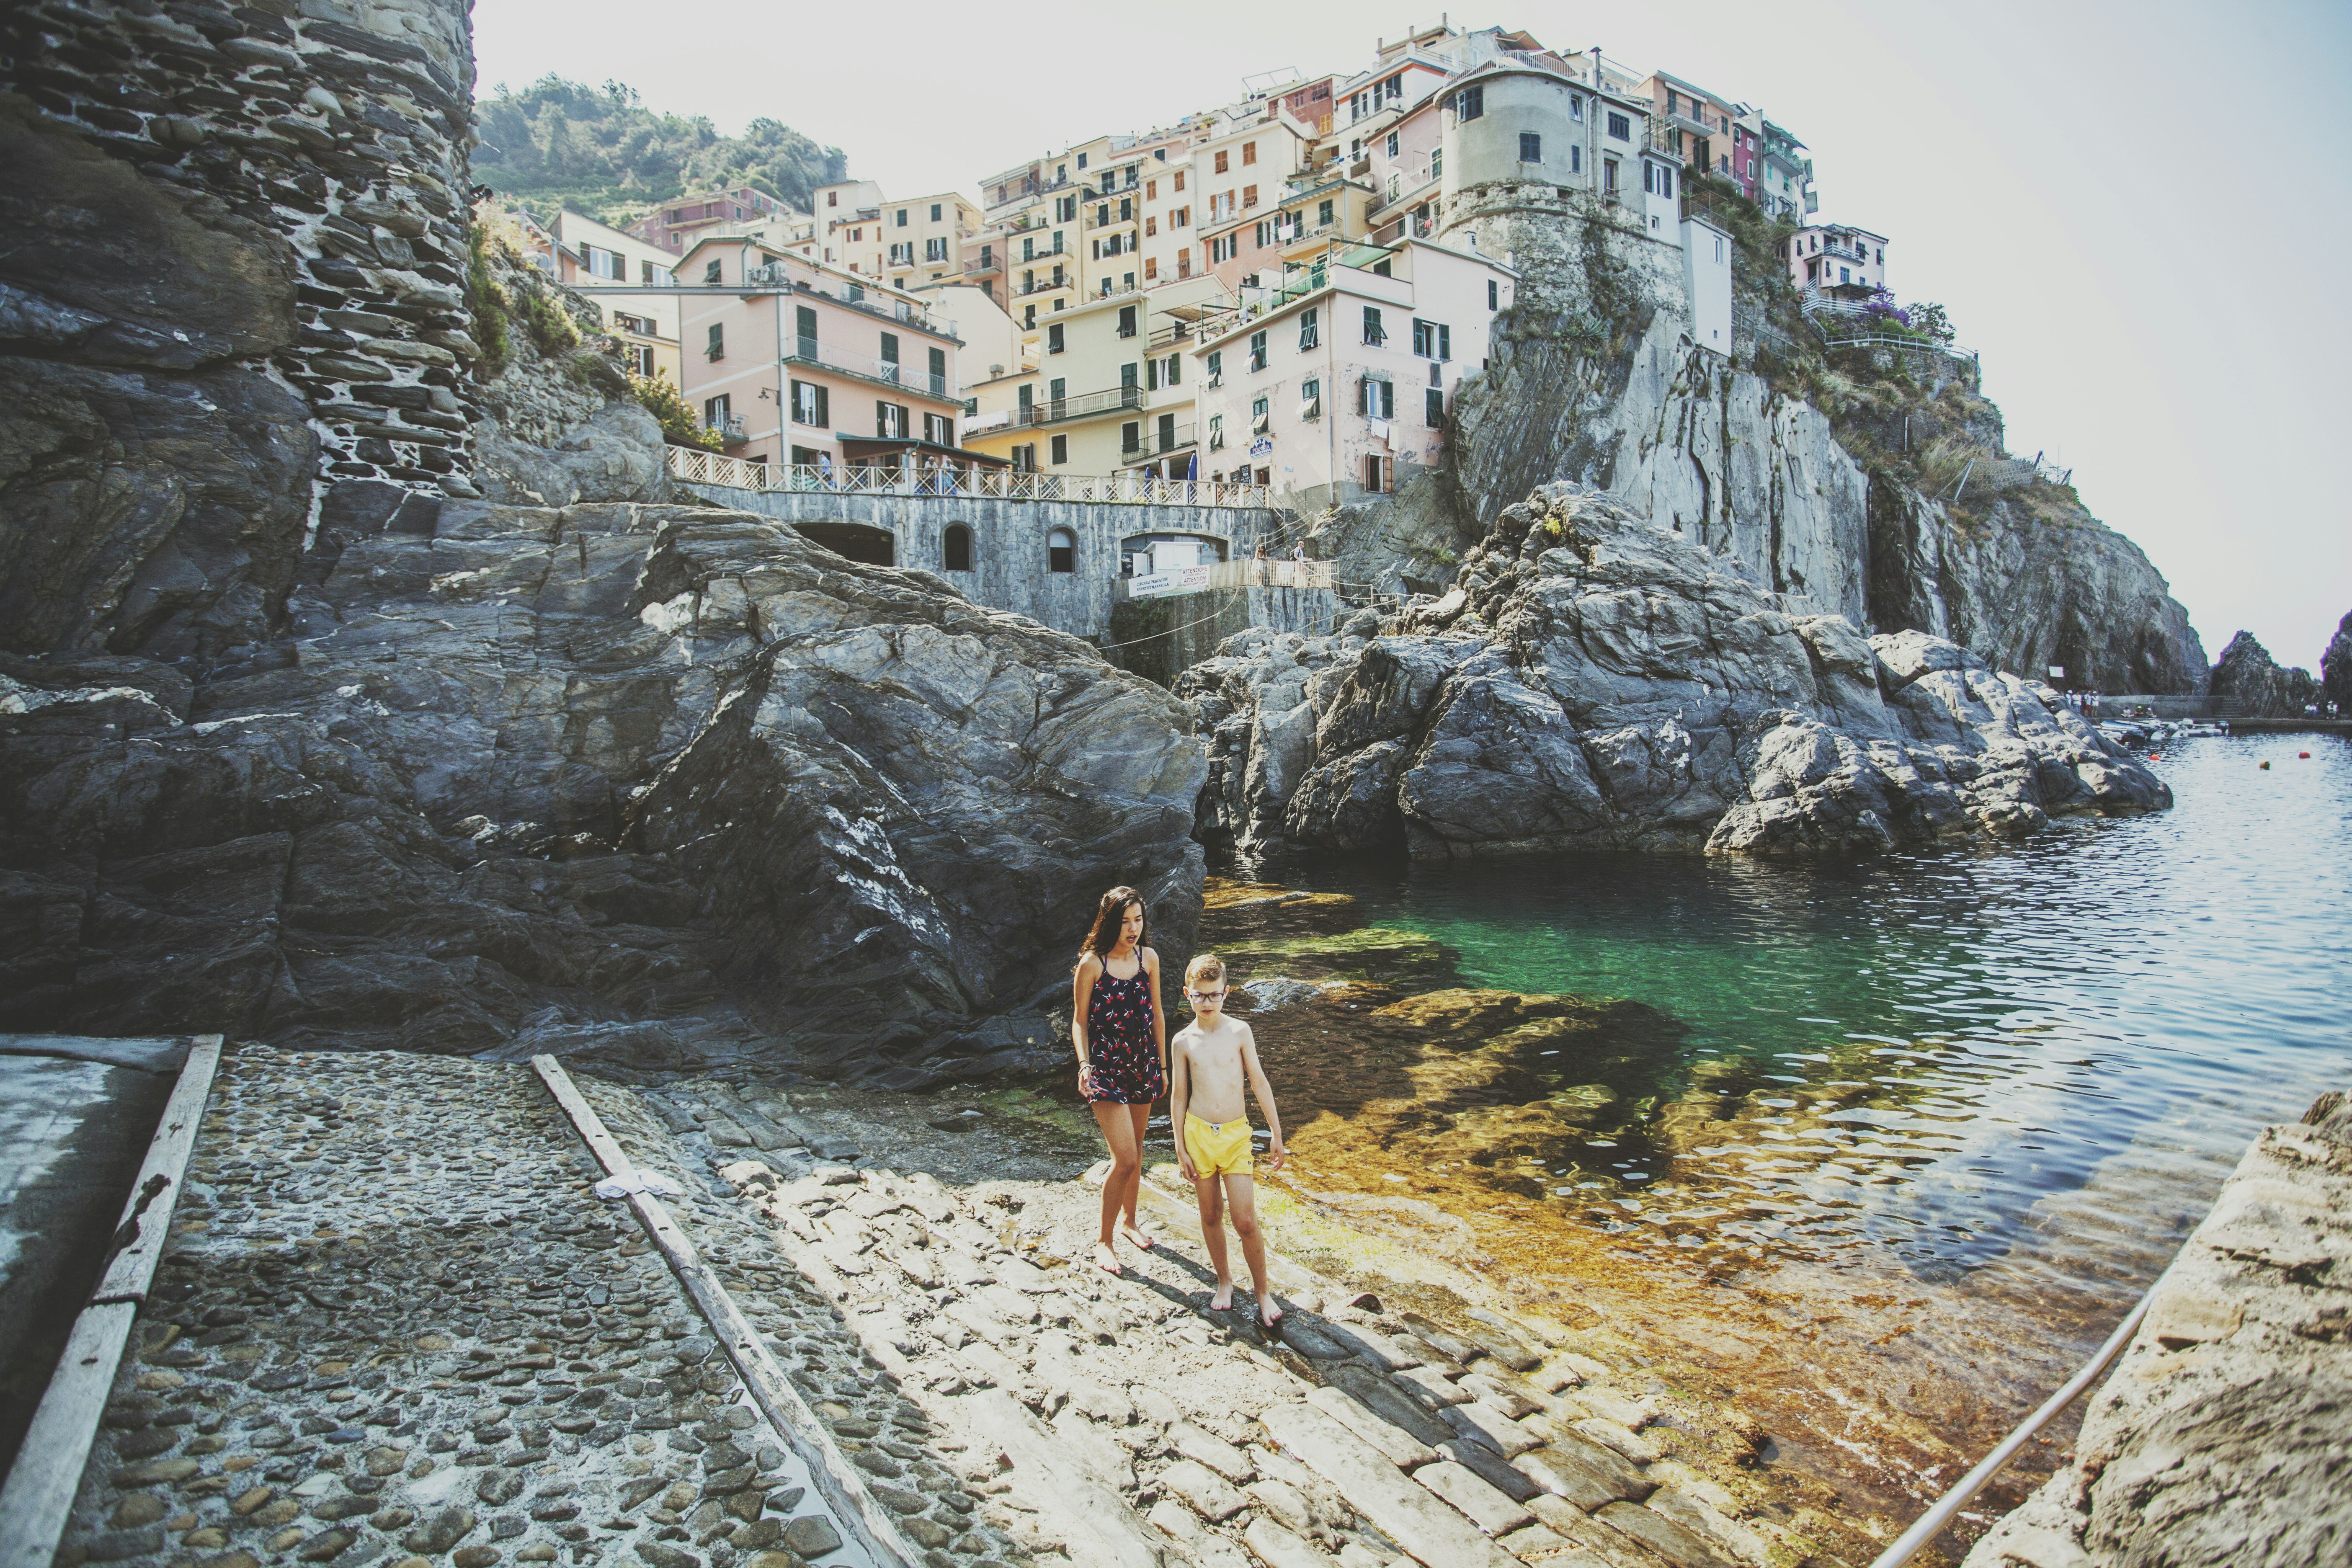 Two kids exploring the shore in Cique Terre Italy